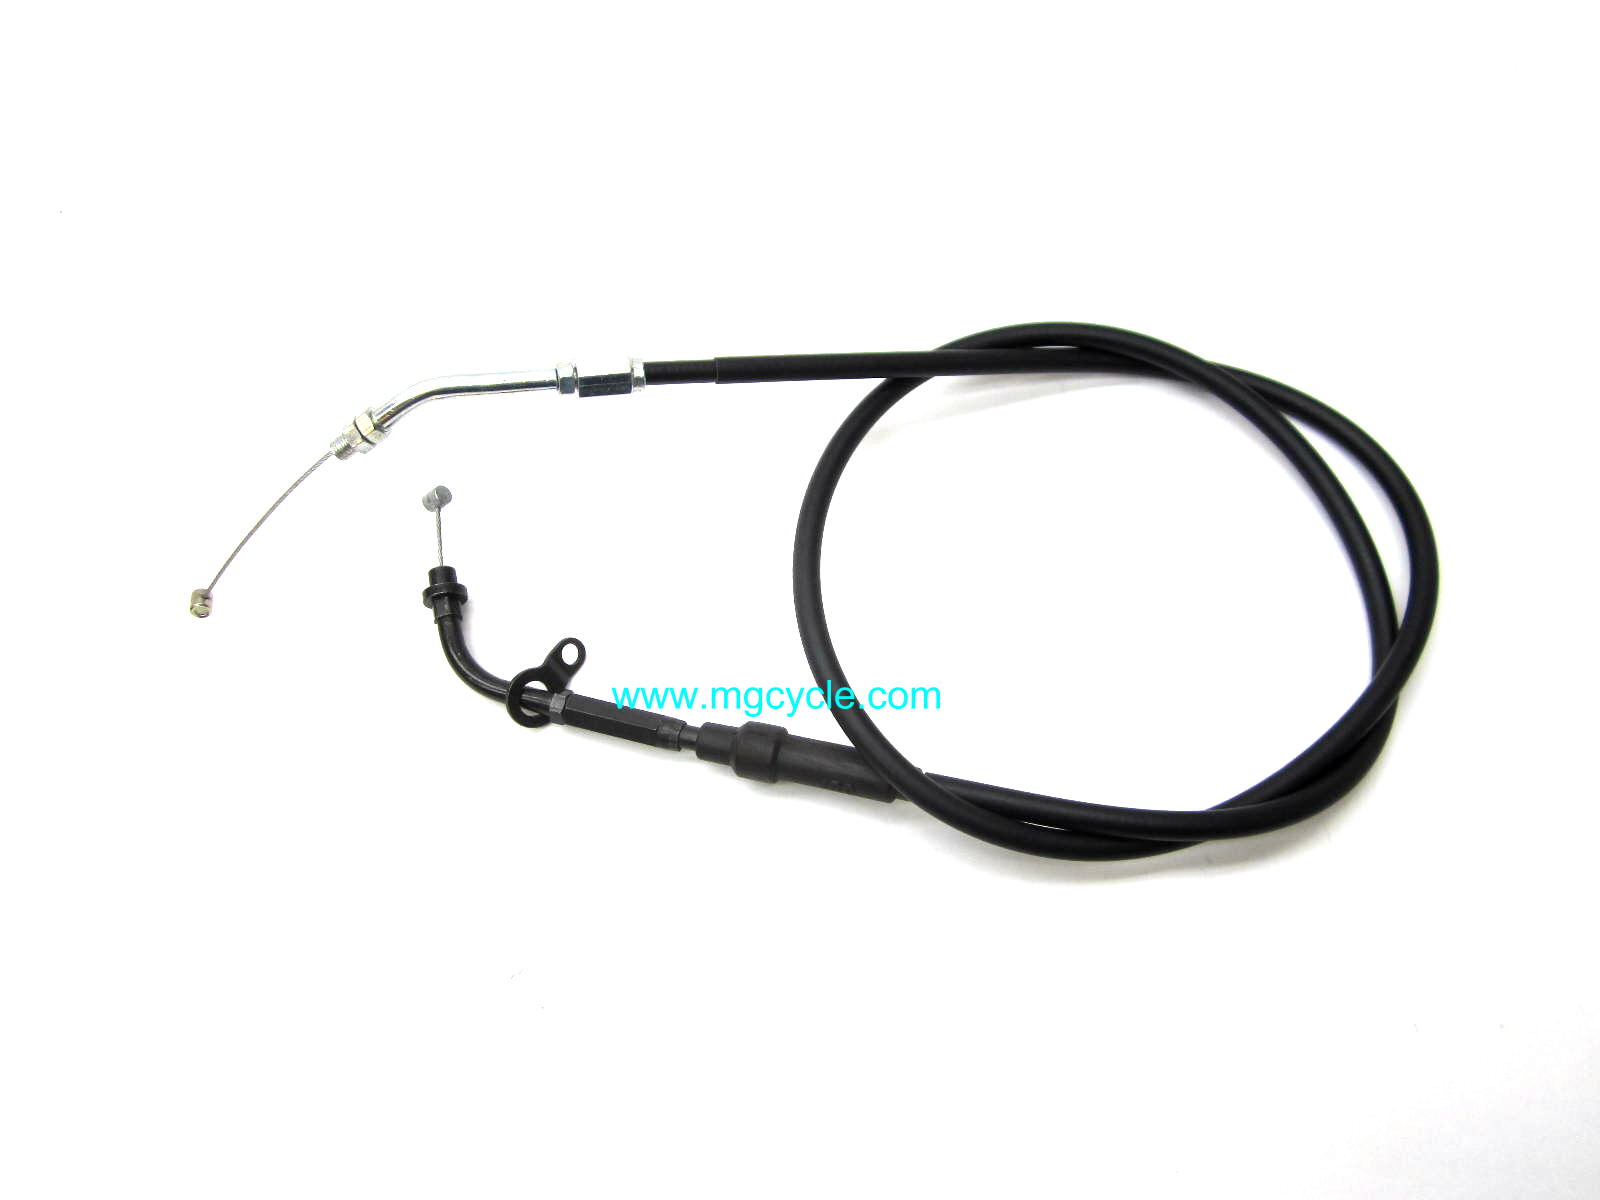 Nevada Classic 750 IE 2004-09 throttle open cable - Click Image to Close